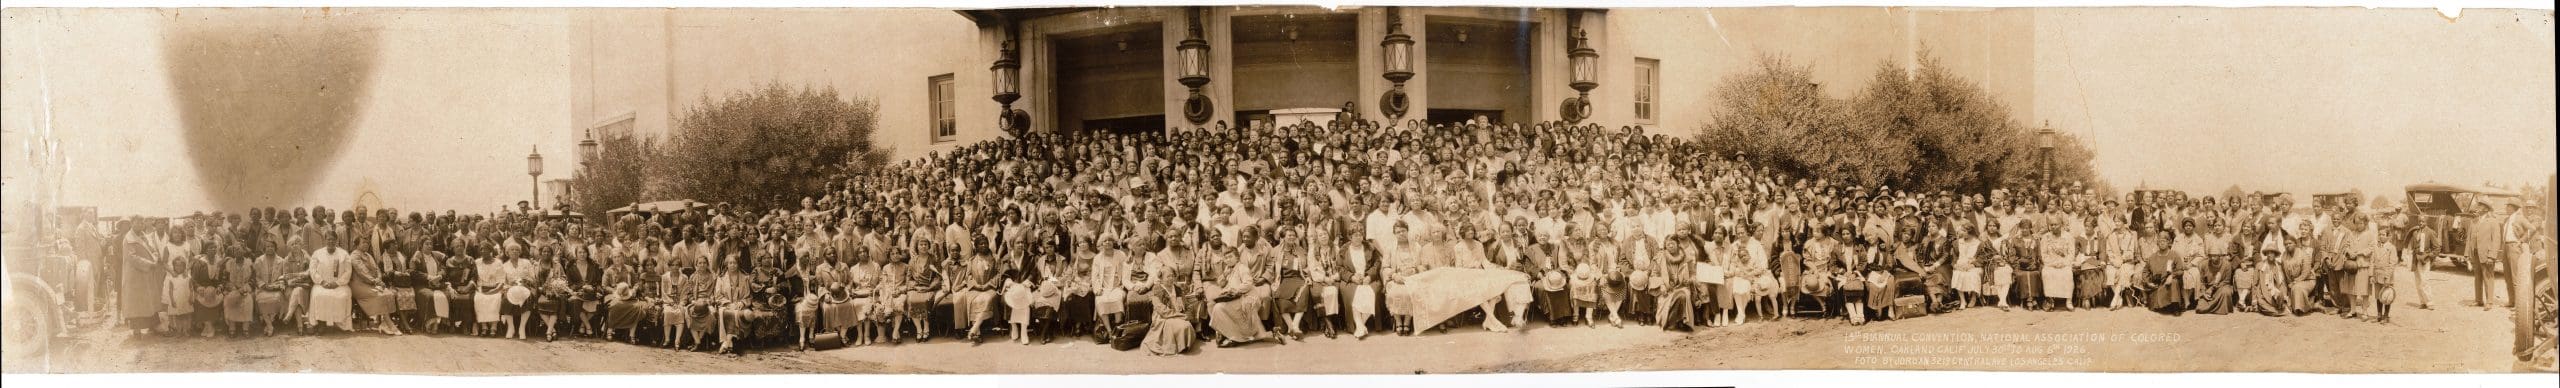 15th biannual convention, National Association of Colored Women, Oakland, California